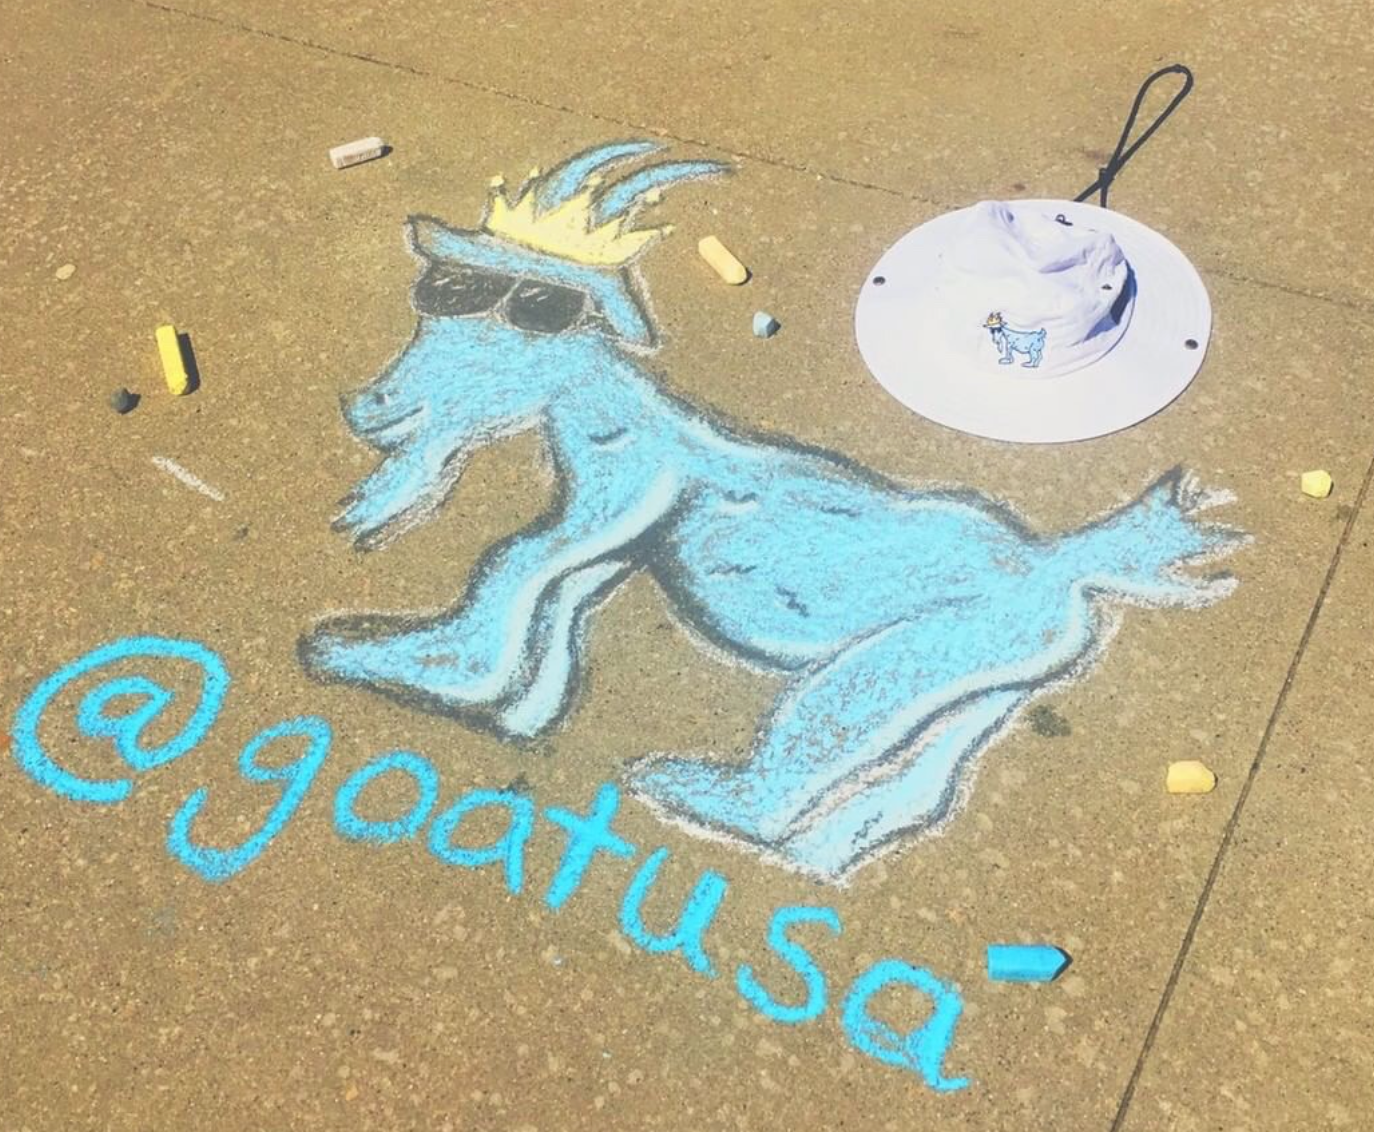 Chalk drawing on sidewalk of GOAT USA goat logo with white bucket hat in the frame